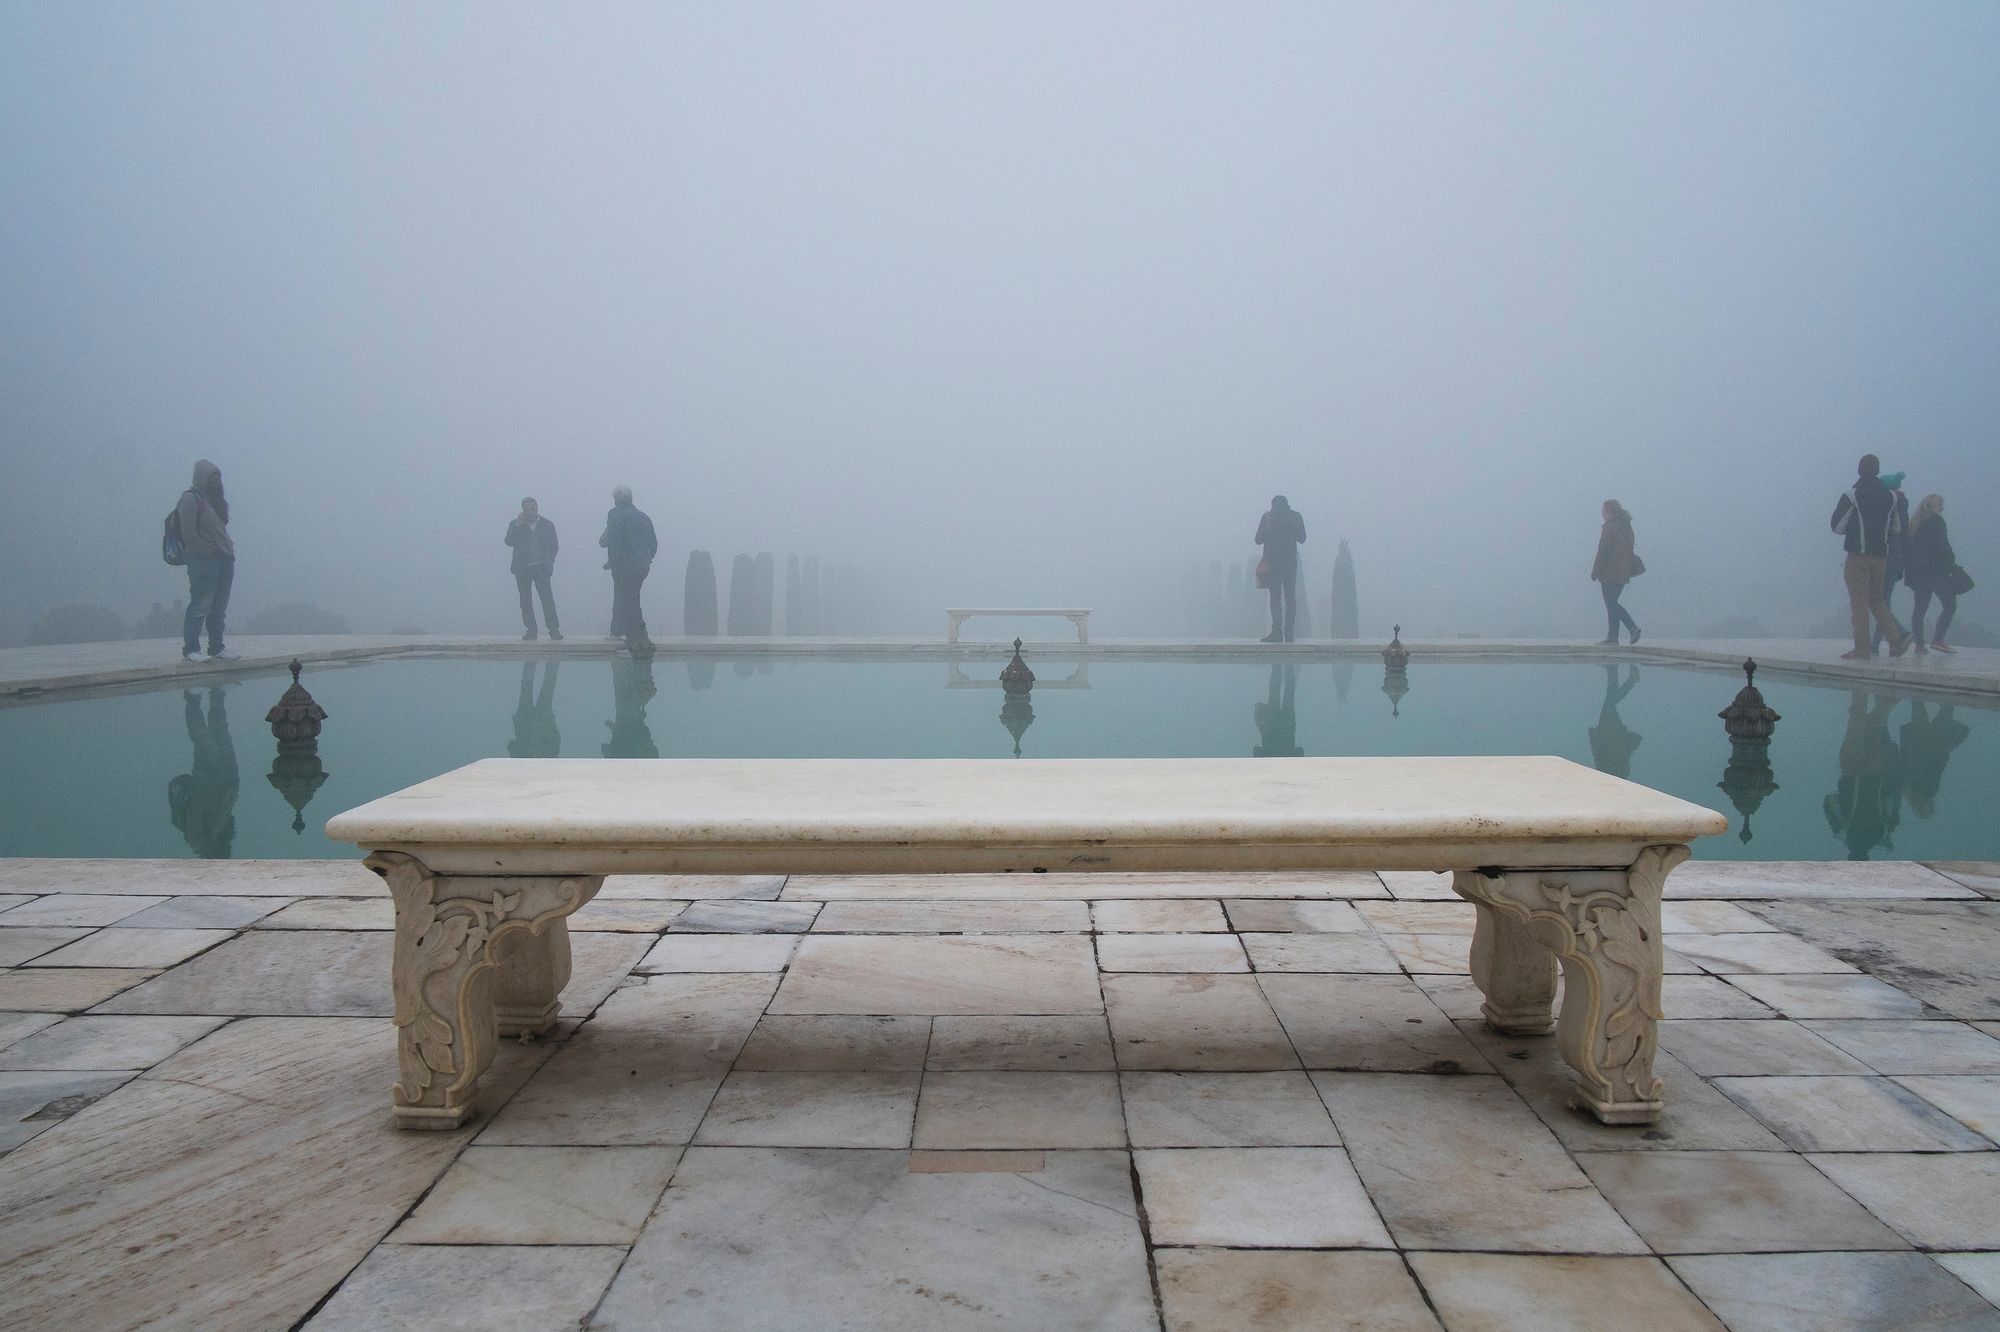 Taj Mahal, Agra, India, 2014, from Volte-face by Oliver Curtis 